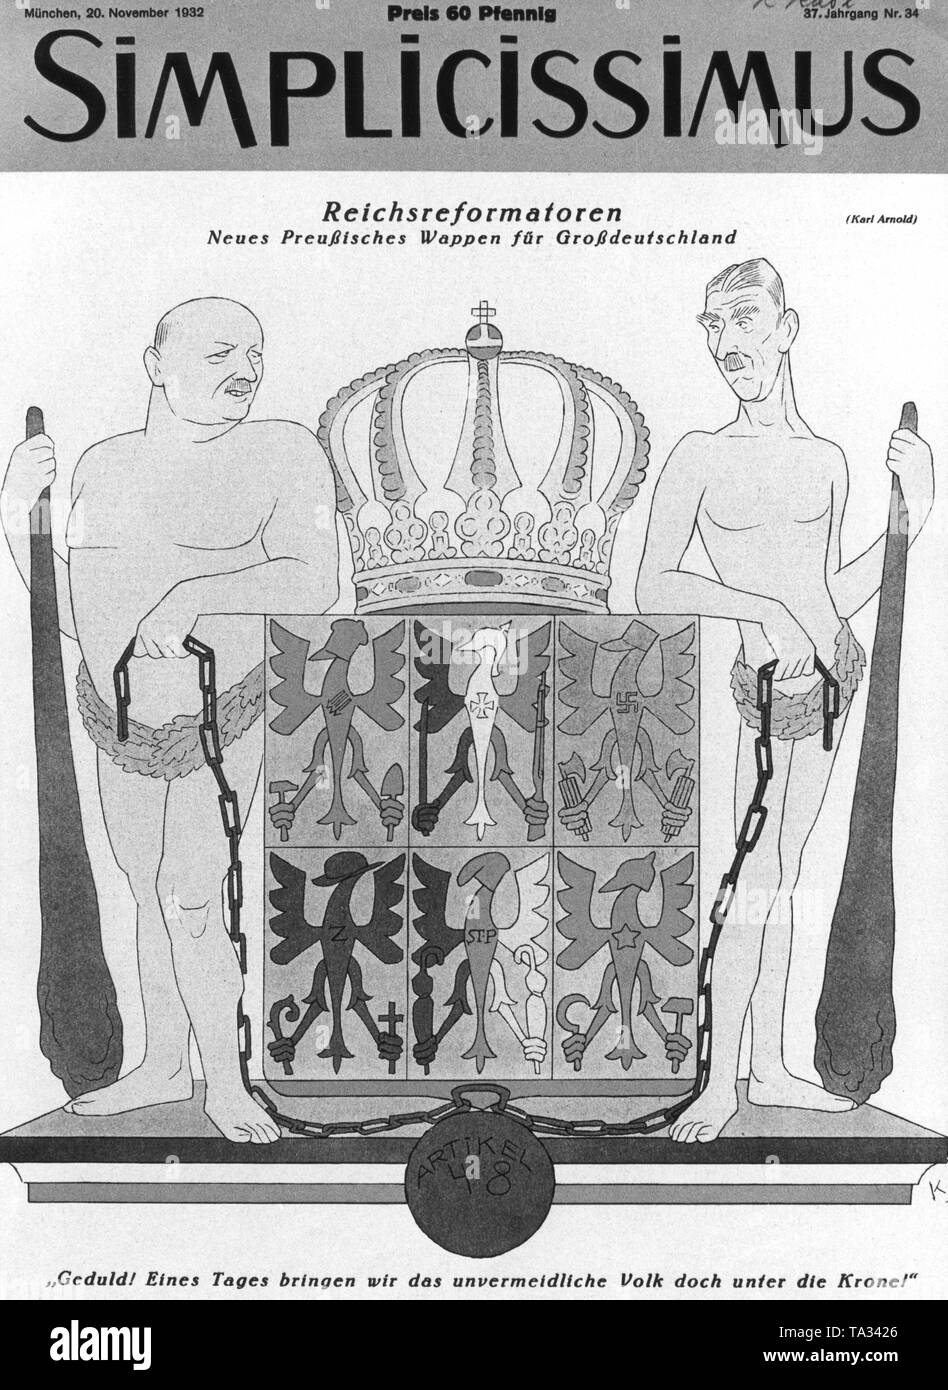 The picture of Karl Arnold shows a new Prussian coat of arms of Greater Germany with Chancellor Franz von Papen (right) and the strong man of his cabinet, Defence Minister Kurt von Schleicher, as Reich reformers who, by means of Article 48, lay in chains the political parties, here represented by eagles. The caption reads: 'Patience! One day we will bring the inevitable people under the crown!', an allusion to the rumors that Papen planned the reintroduction of the monarchy. Stock Photo